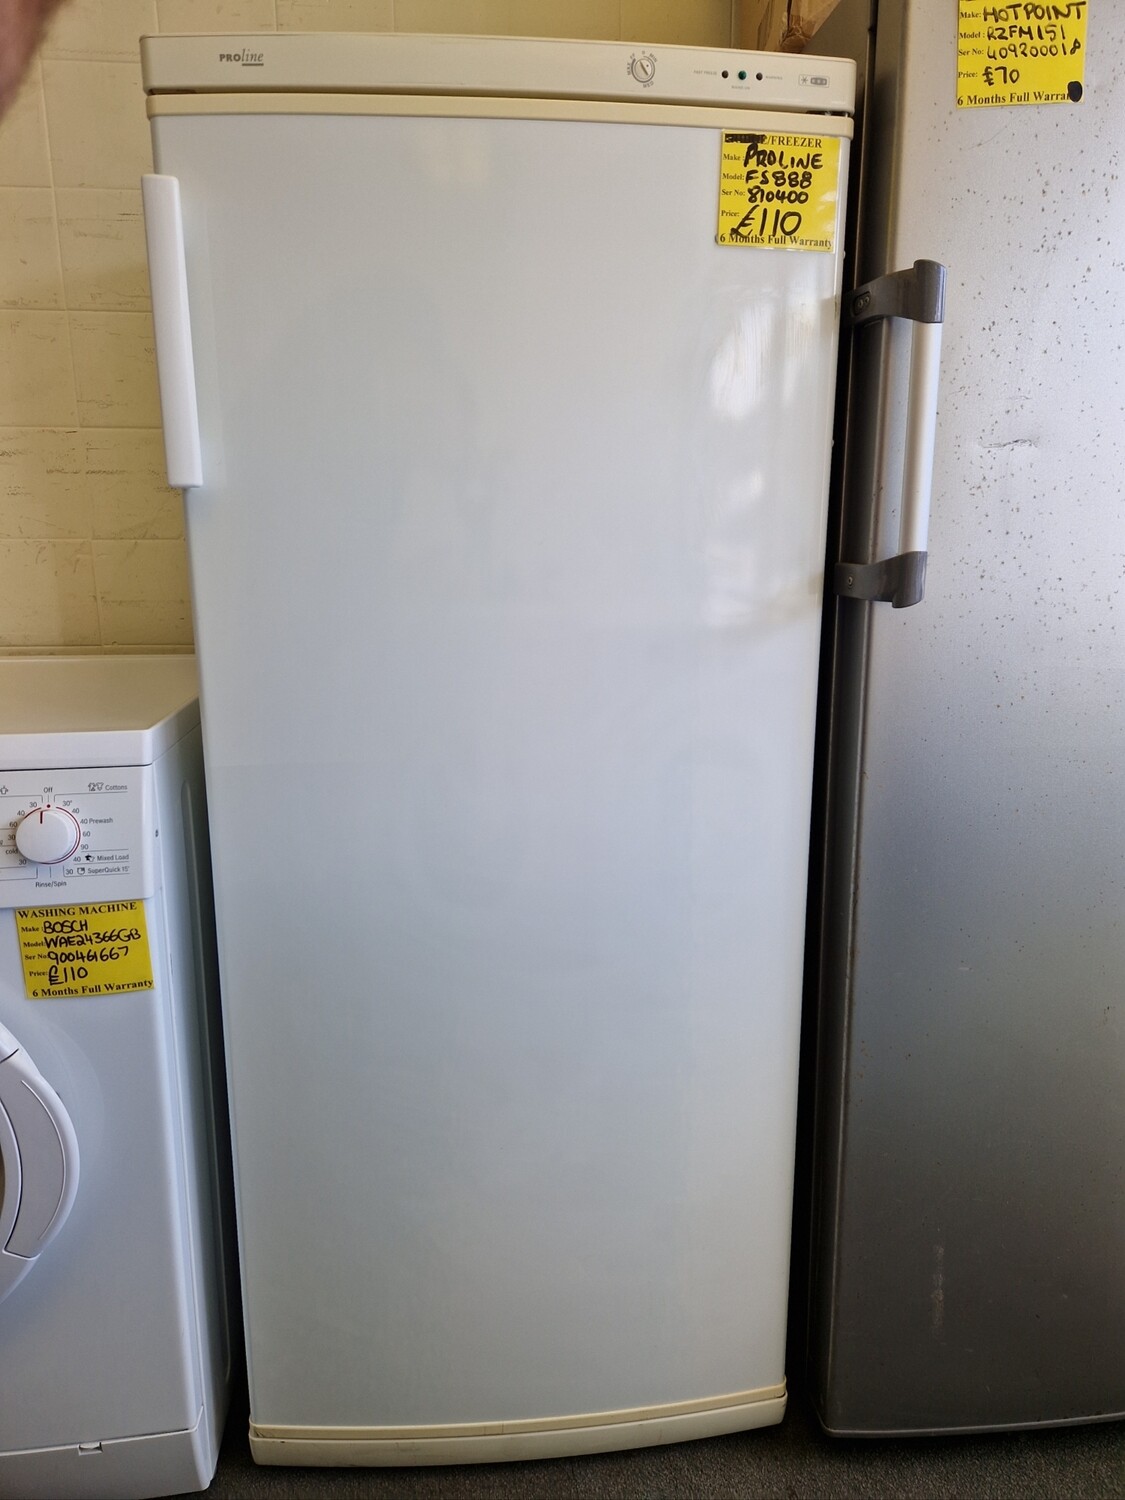 Upright Freezer with Drawers @costco #costco_empties #costcofinds